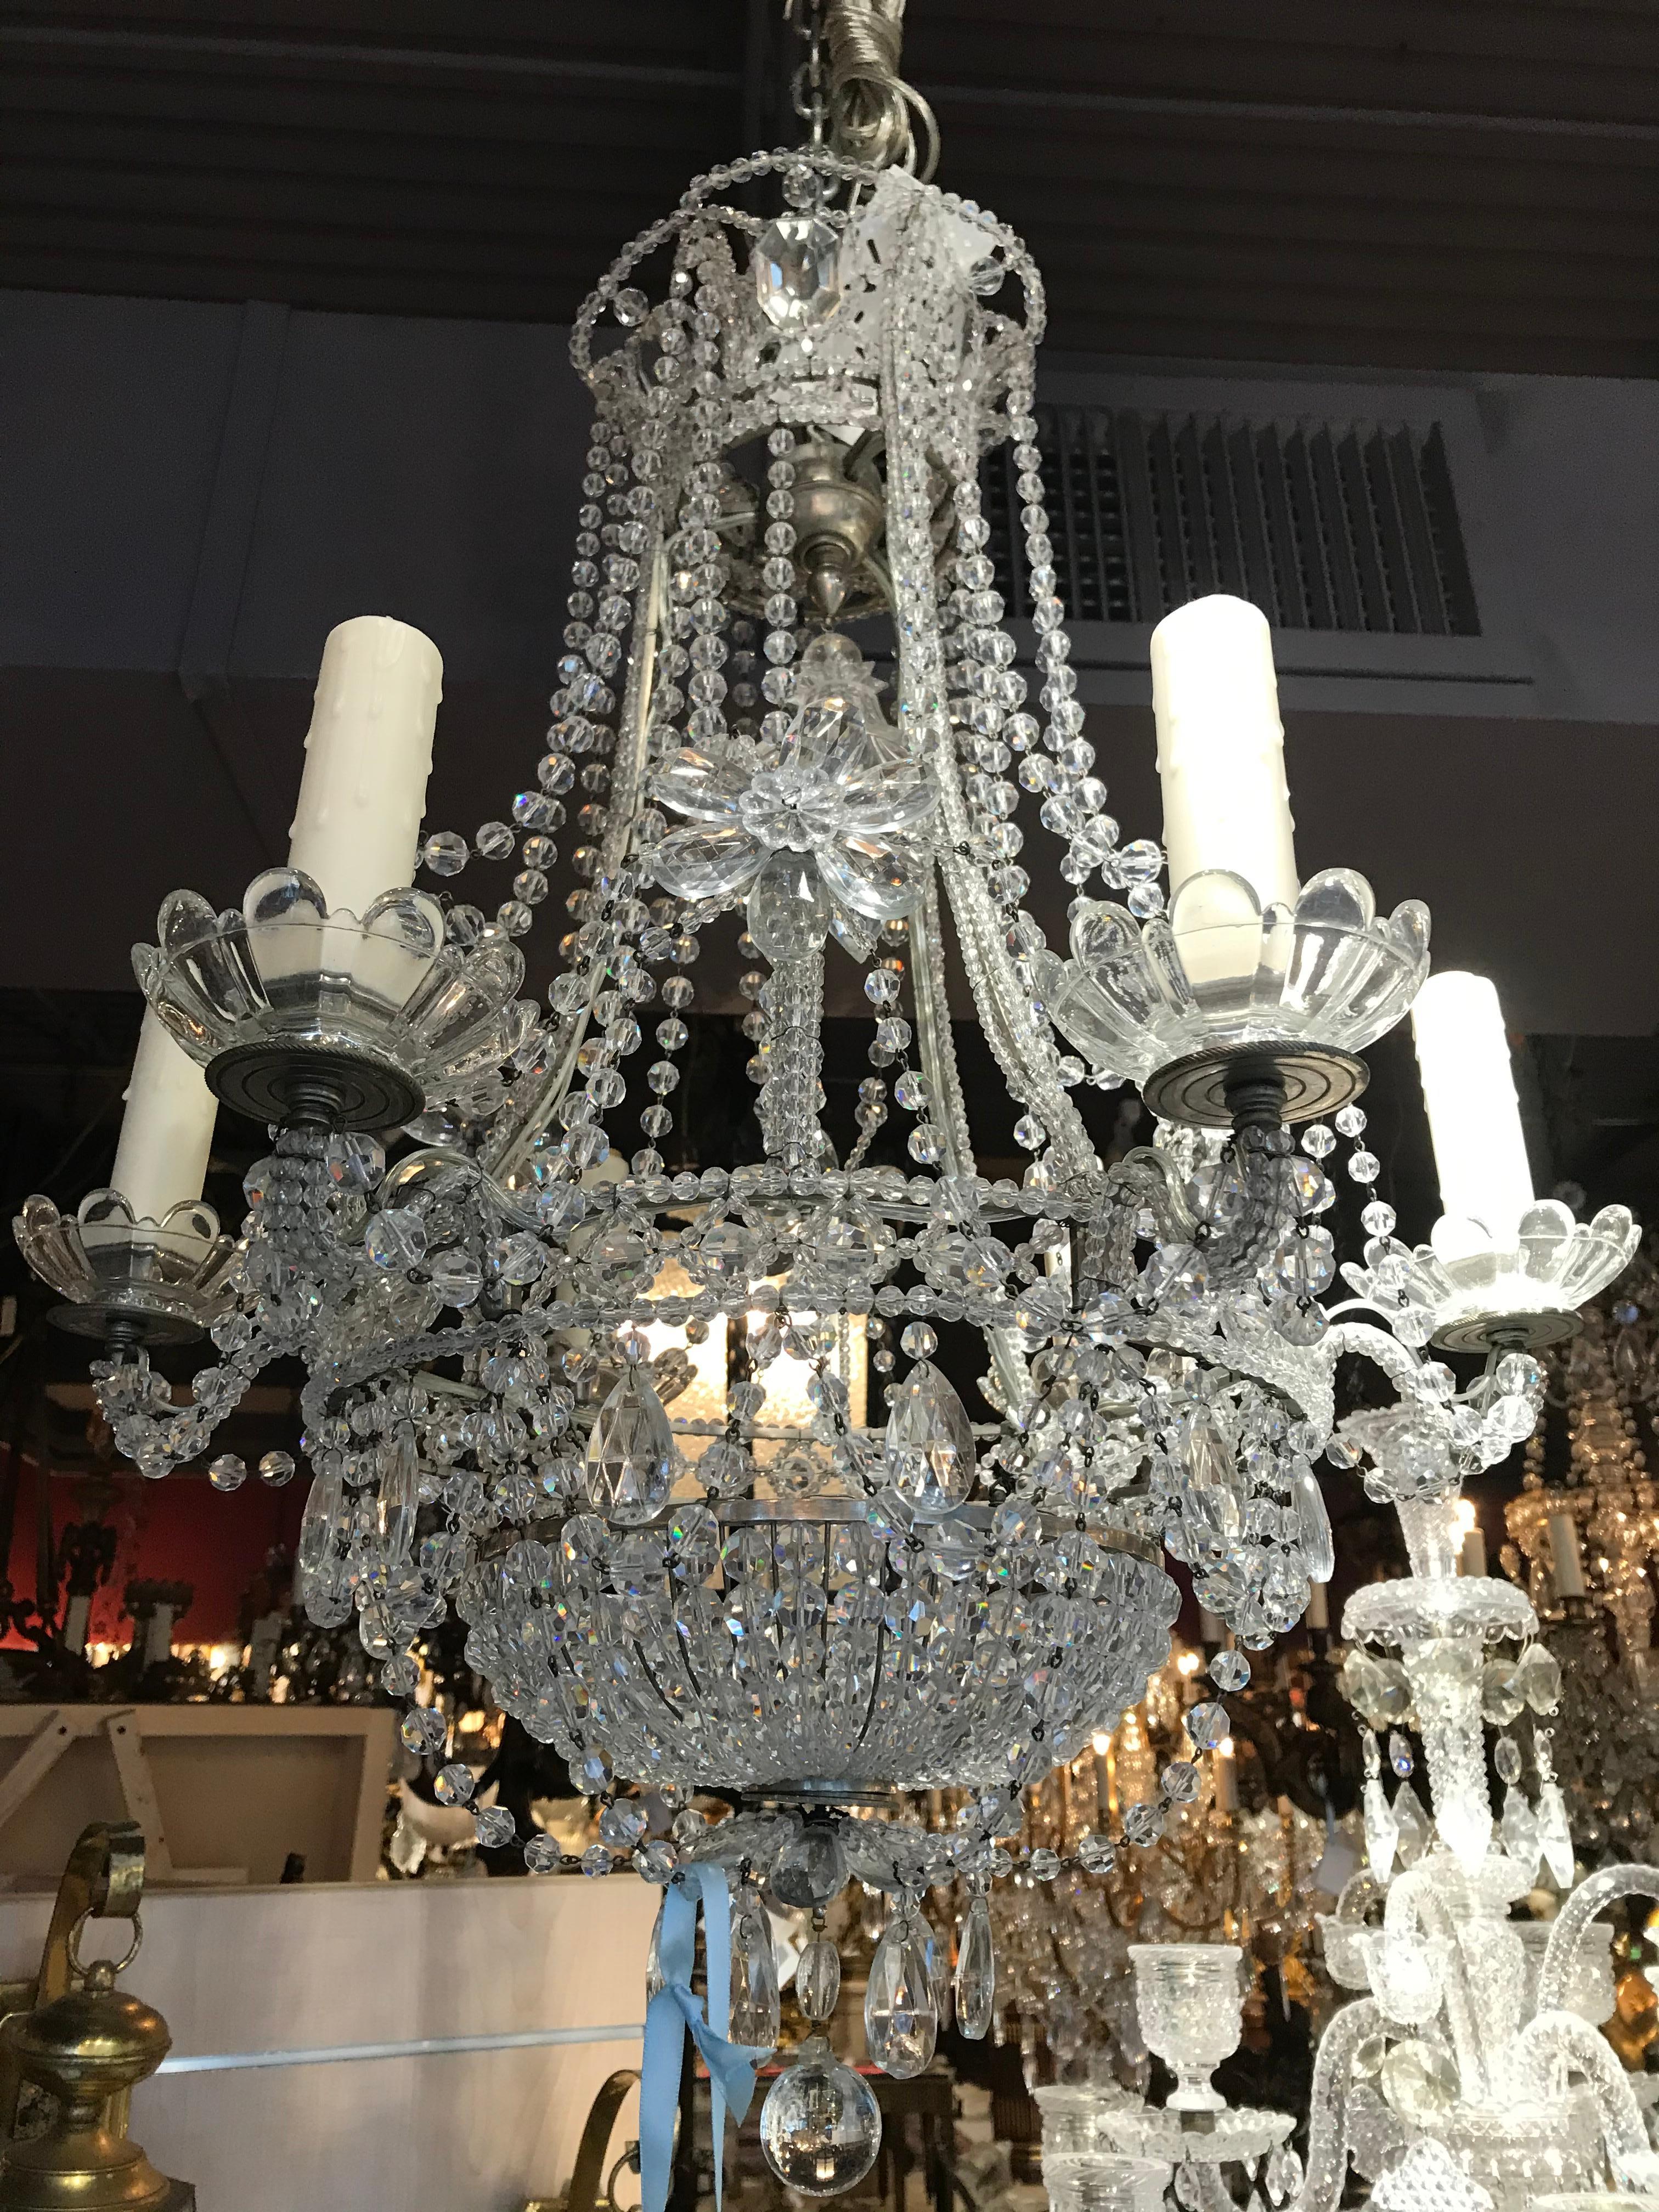 A very fine and decorative silver over bronze and crystal chandelier.
Attributed to Maison Jansen, France, circa 1930.
Dimensions: Height 27